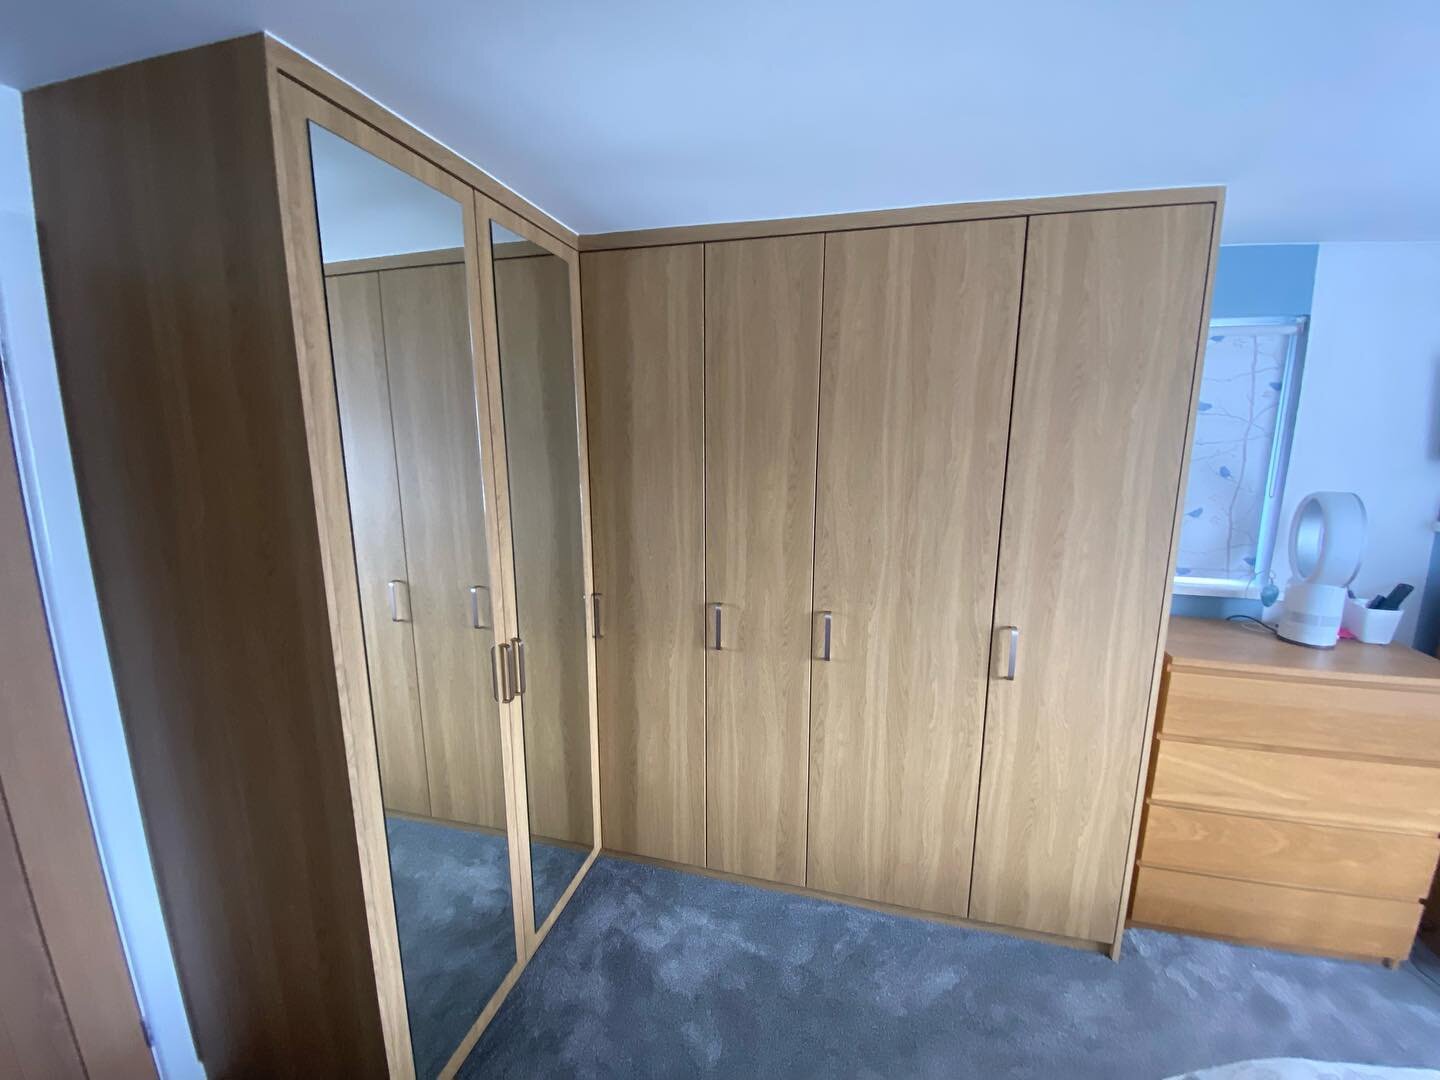 Bespoke corner wardrobes installed. This included multiple hanging rails and concealed draws with soft close runners. Pre finished oak effect materials used to clad the exterior.